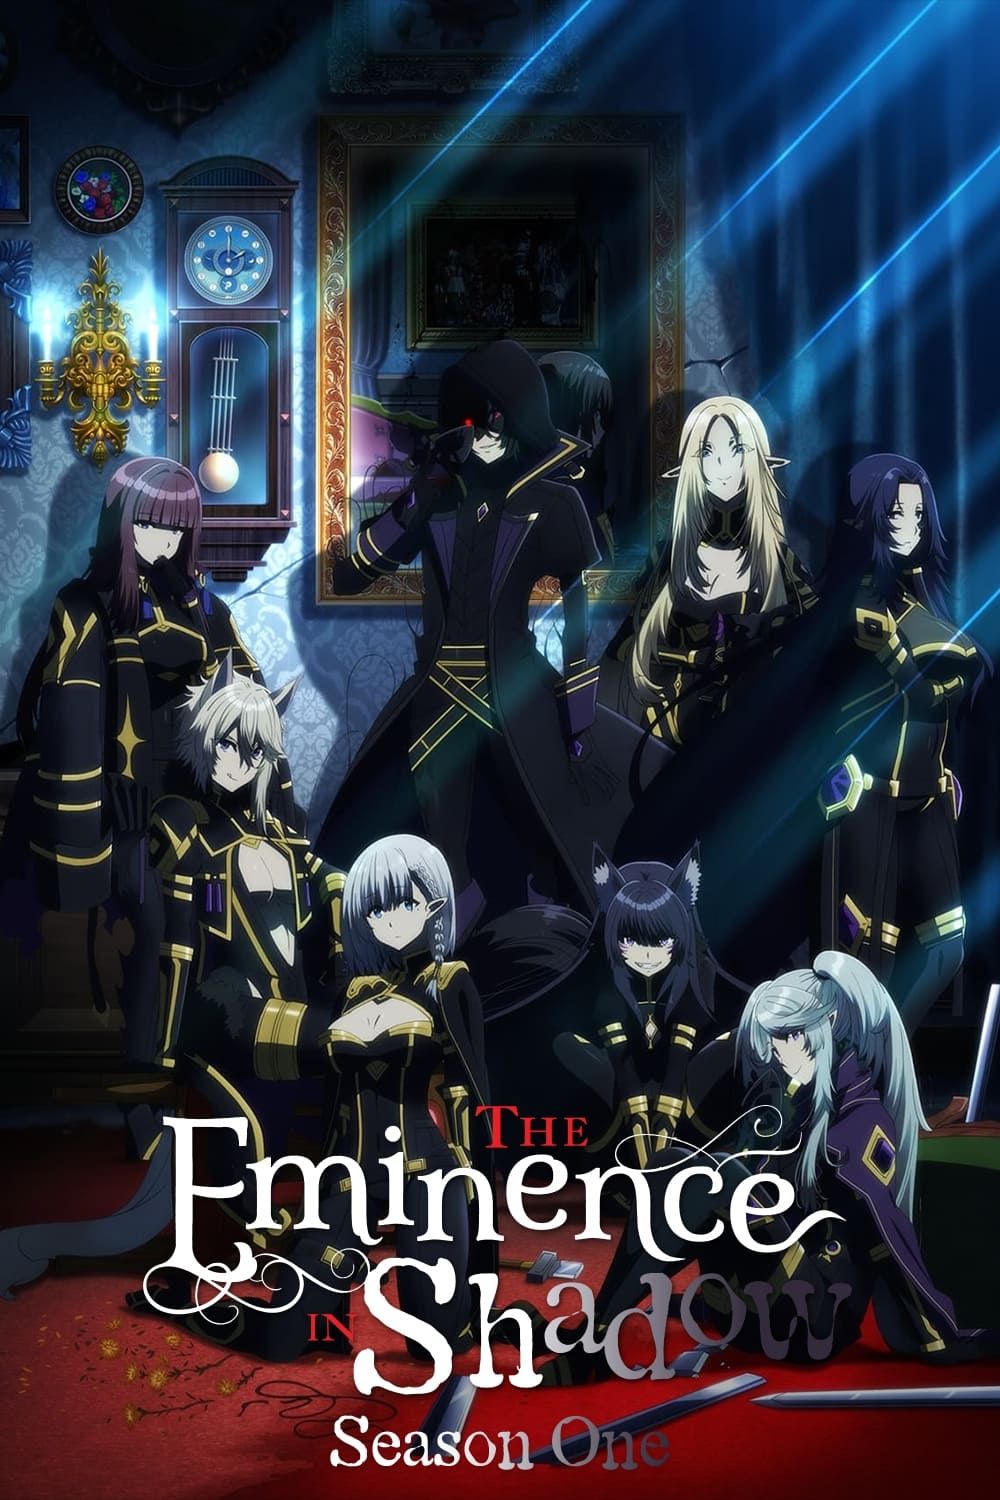 The Eminence in Shadow Season 2 Episode 10 Vostfr